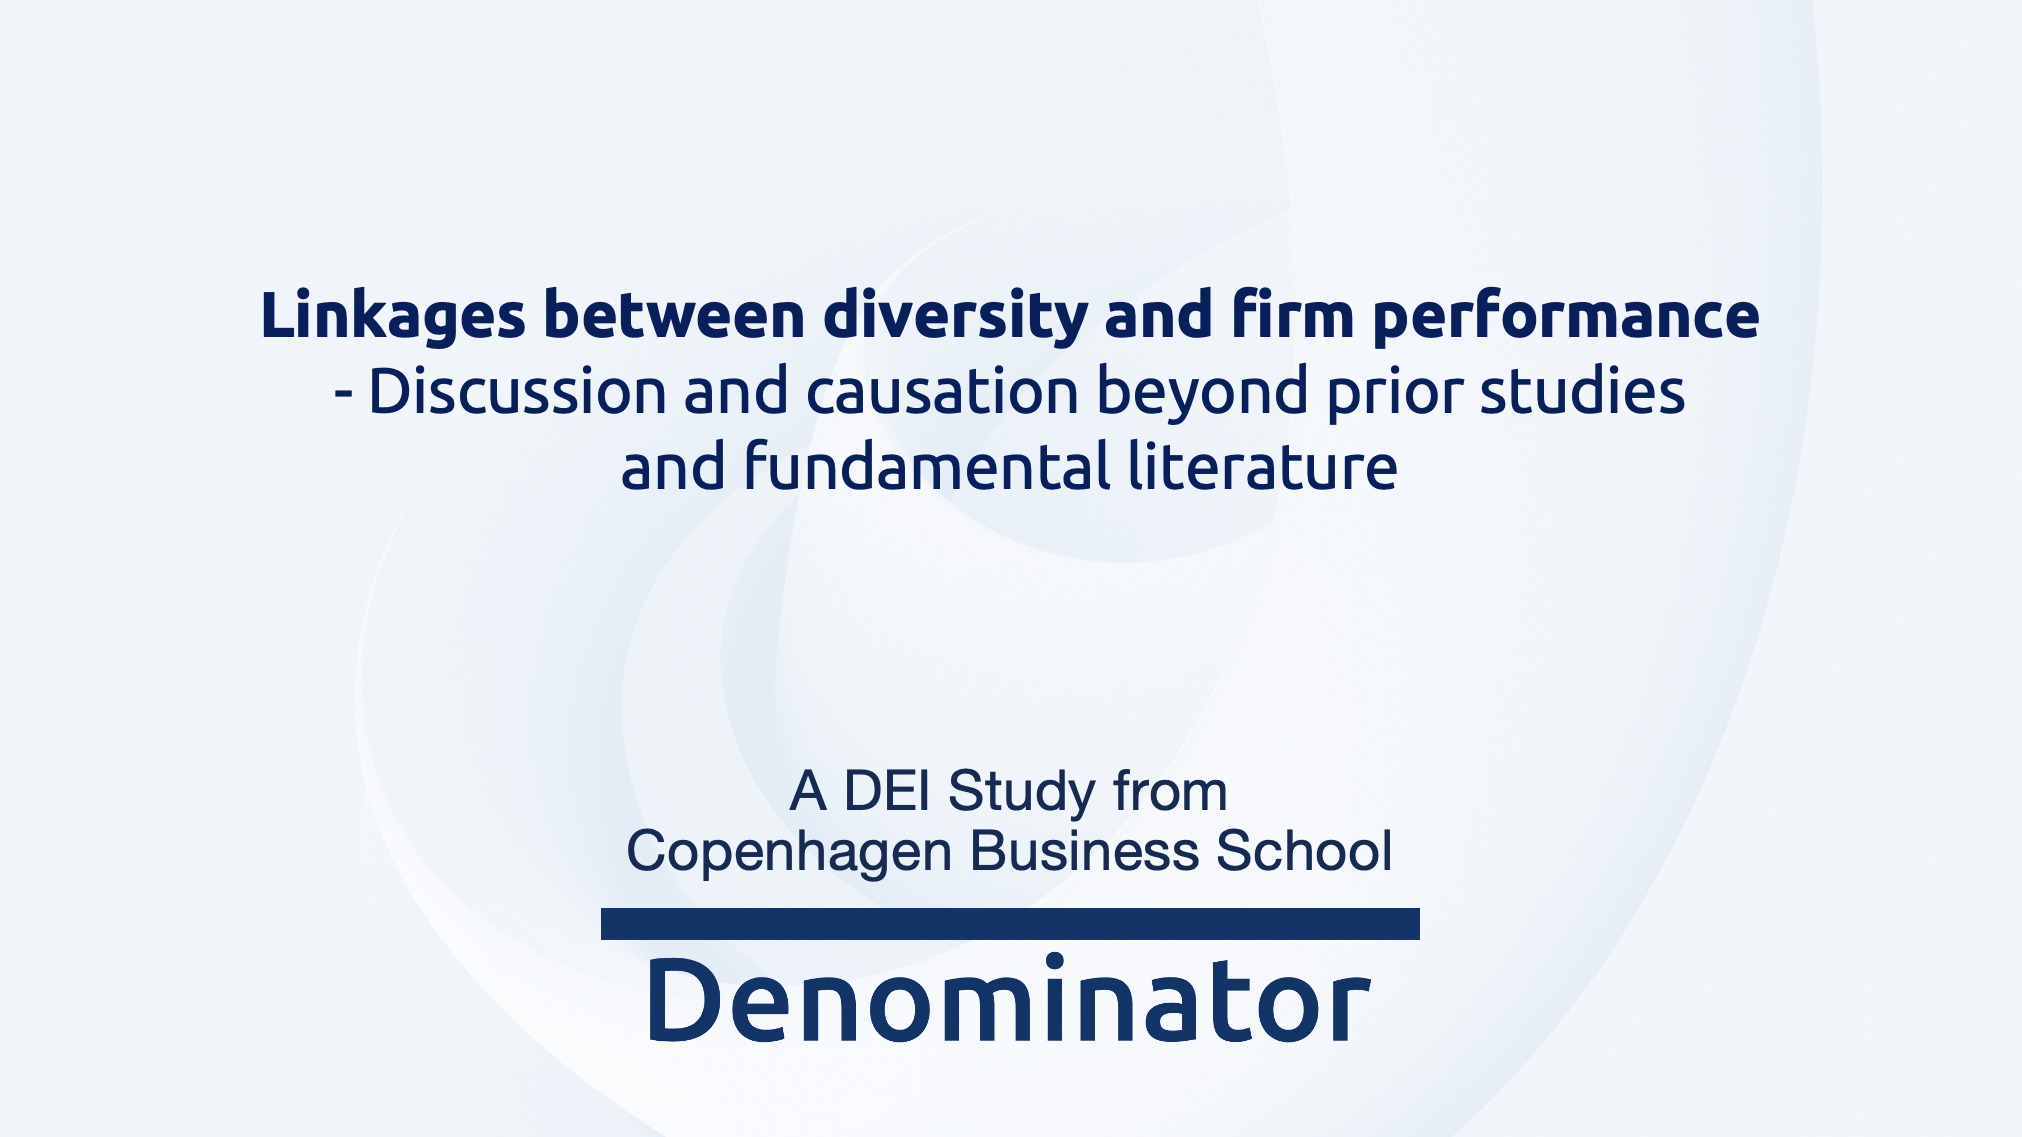 A DEI Study on Linkages between diversity and financial firm performance